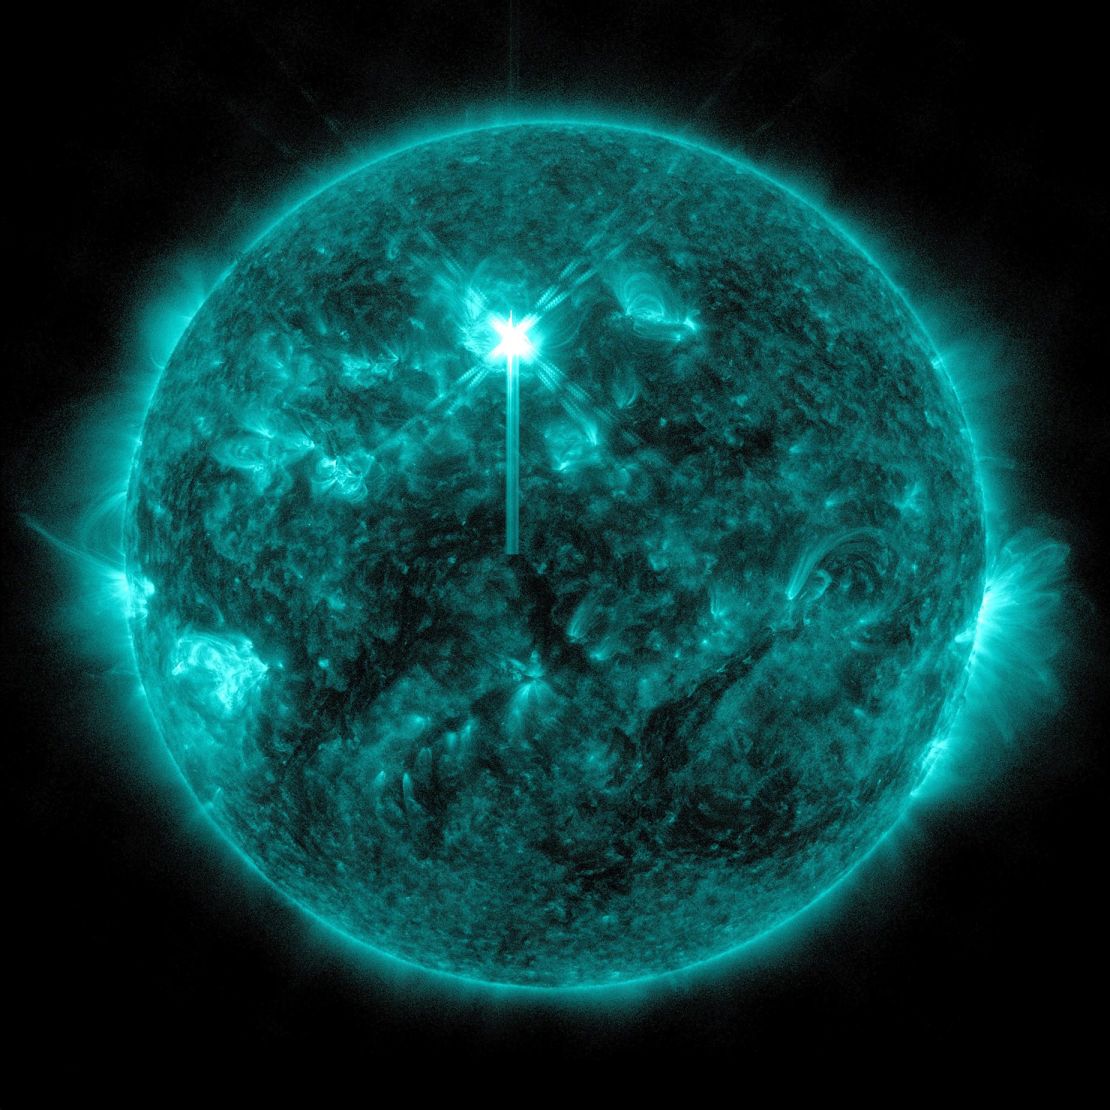 NASA’s Solar Dynamics Observatory captured this image of a solar flare in extreme ultraviolet light on May 2. The flare is the bright flash toward the upper middle area of the sun.